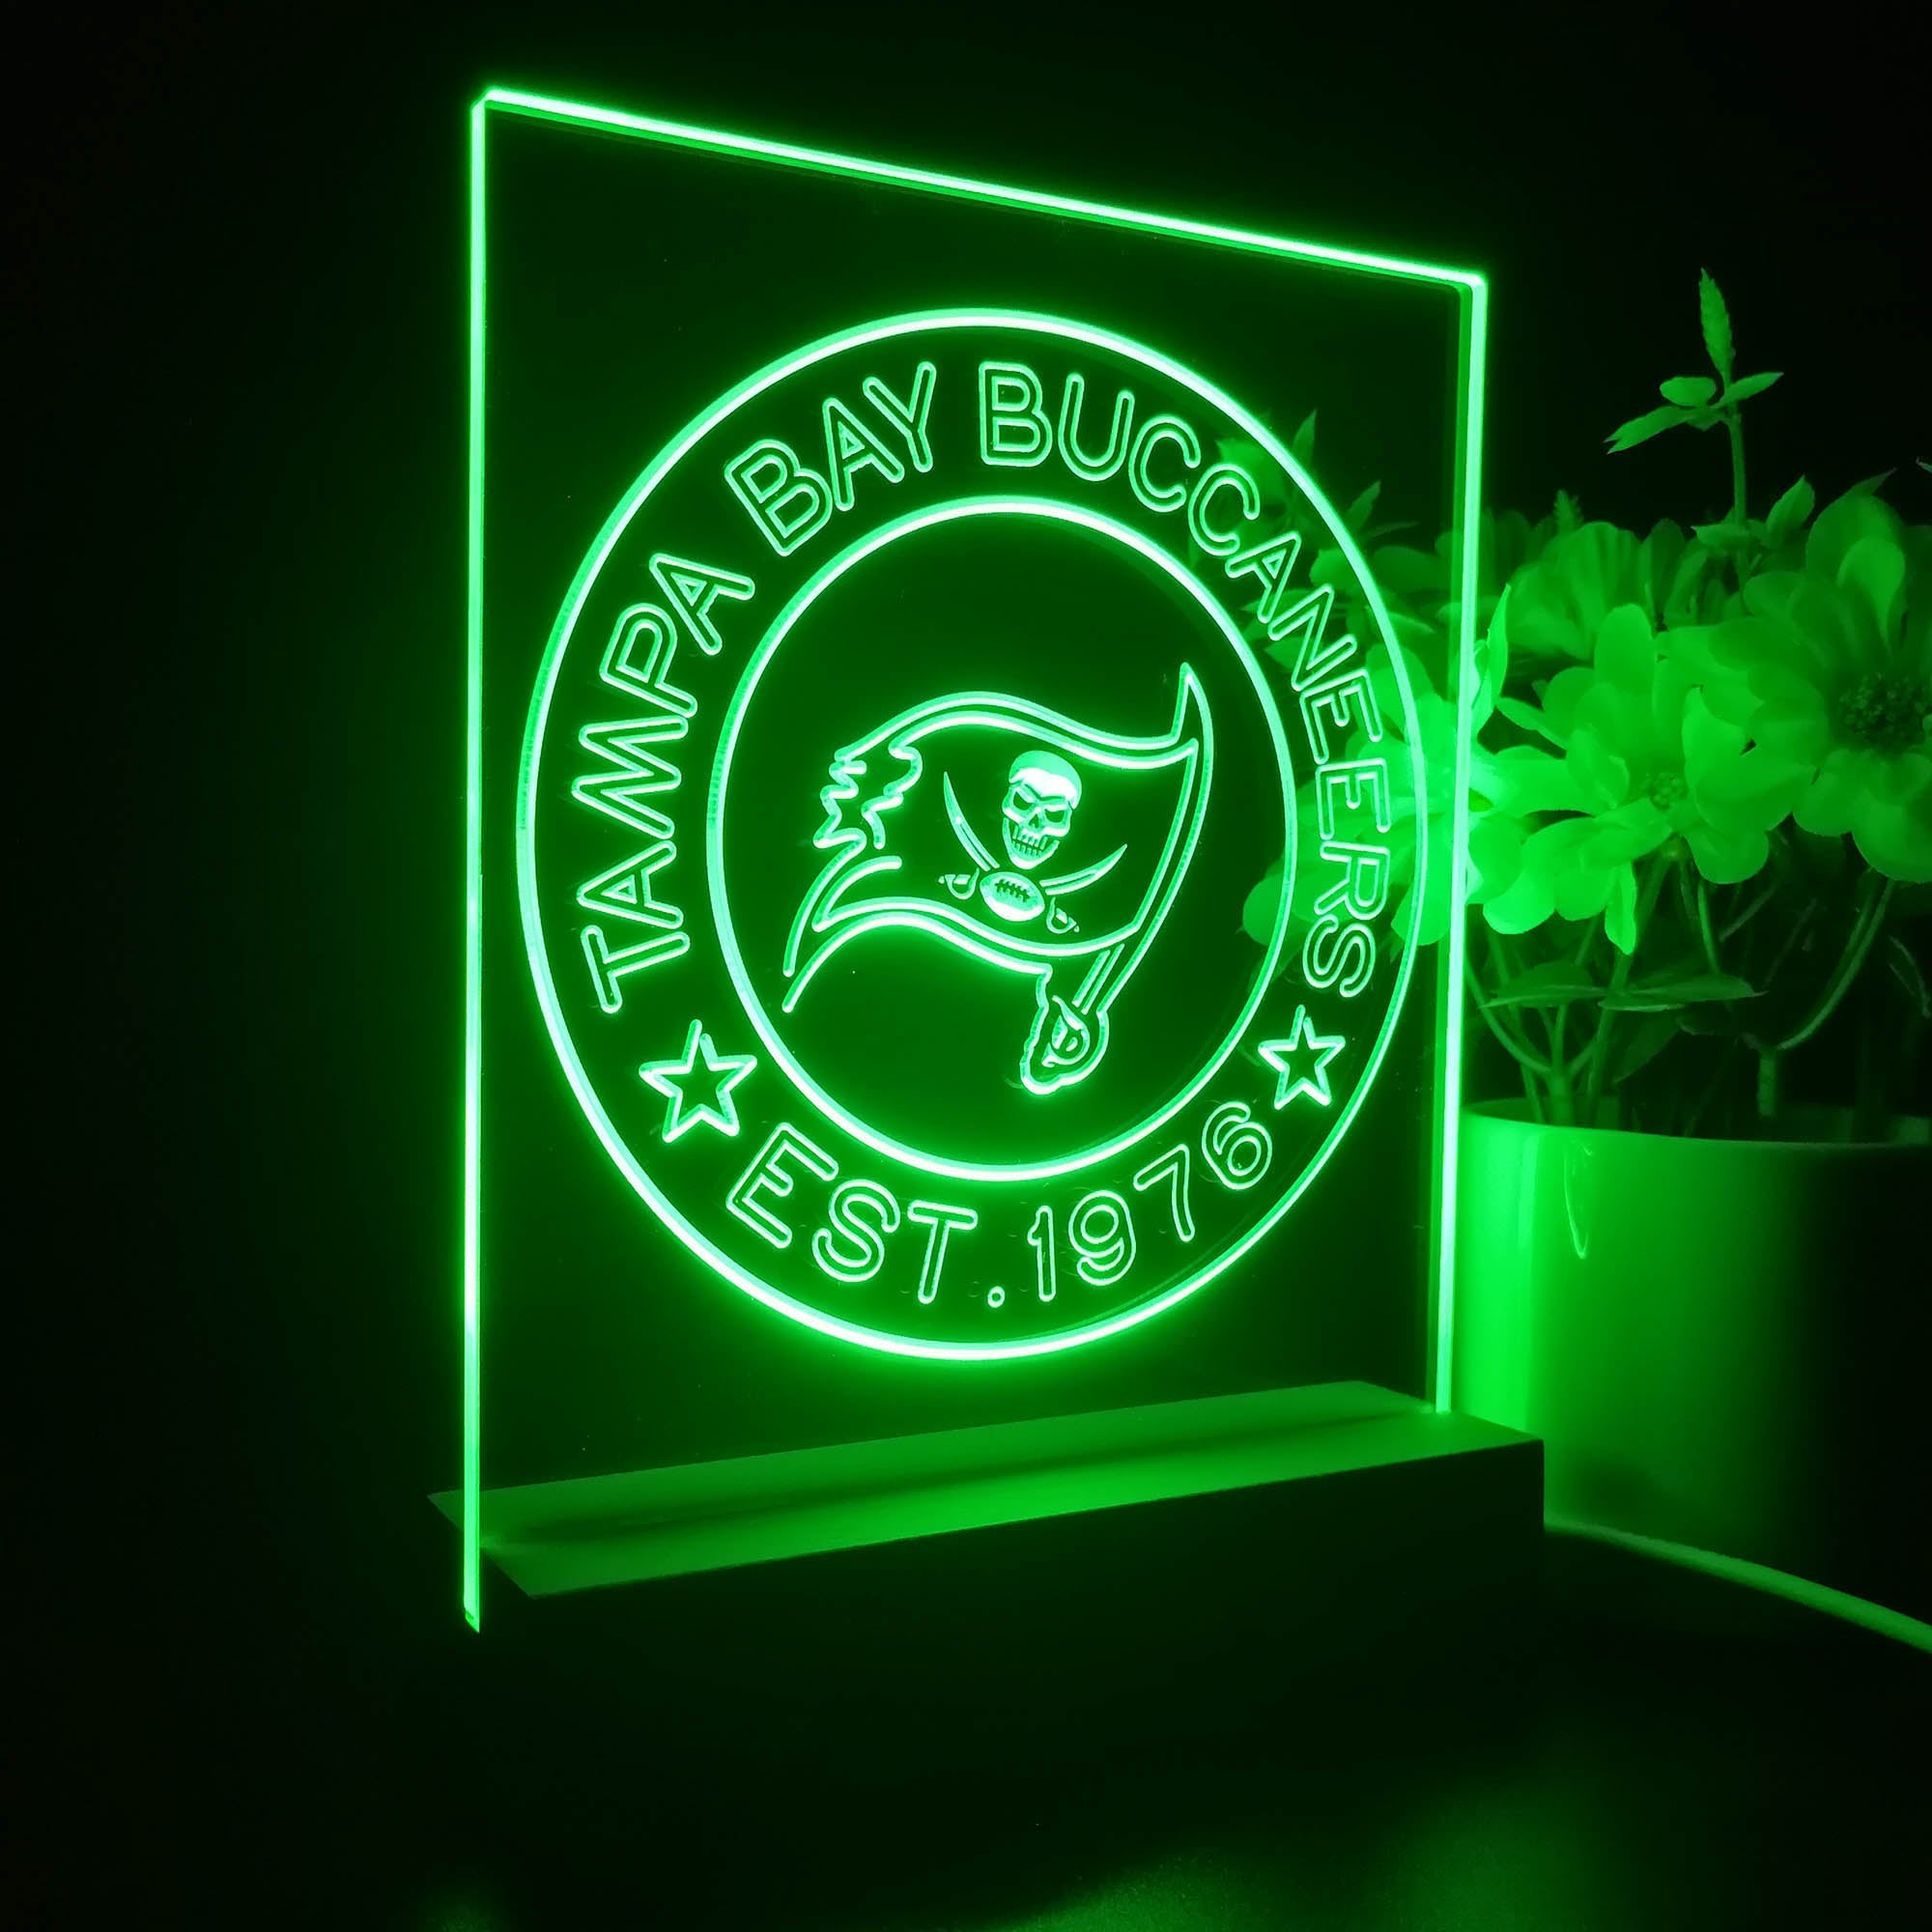 Personalized Tampa Bay Buccaneers Souvenir Neon LED Night Light Sign